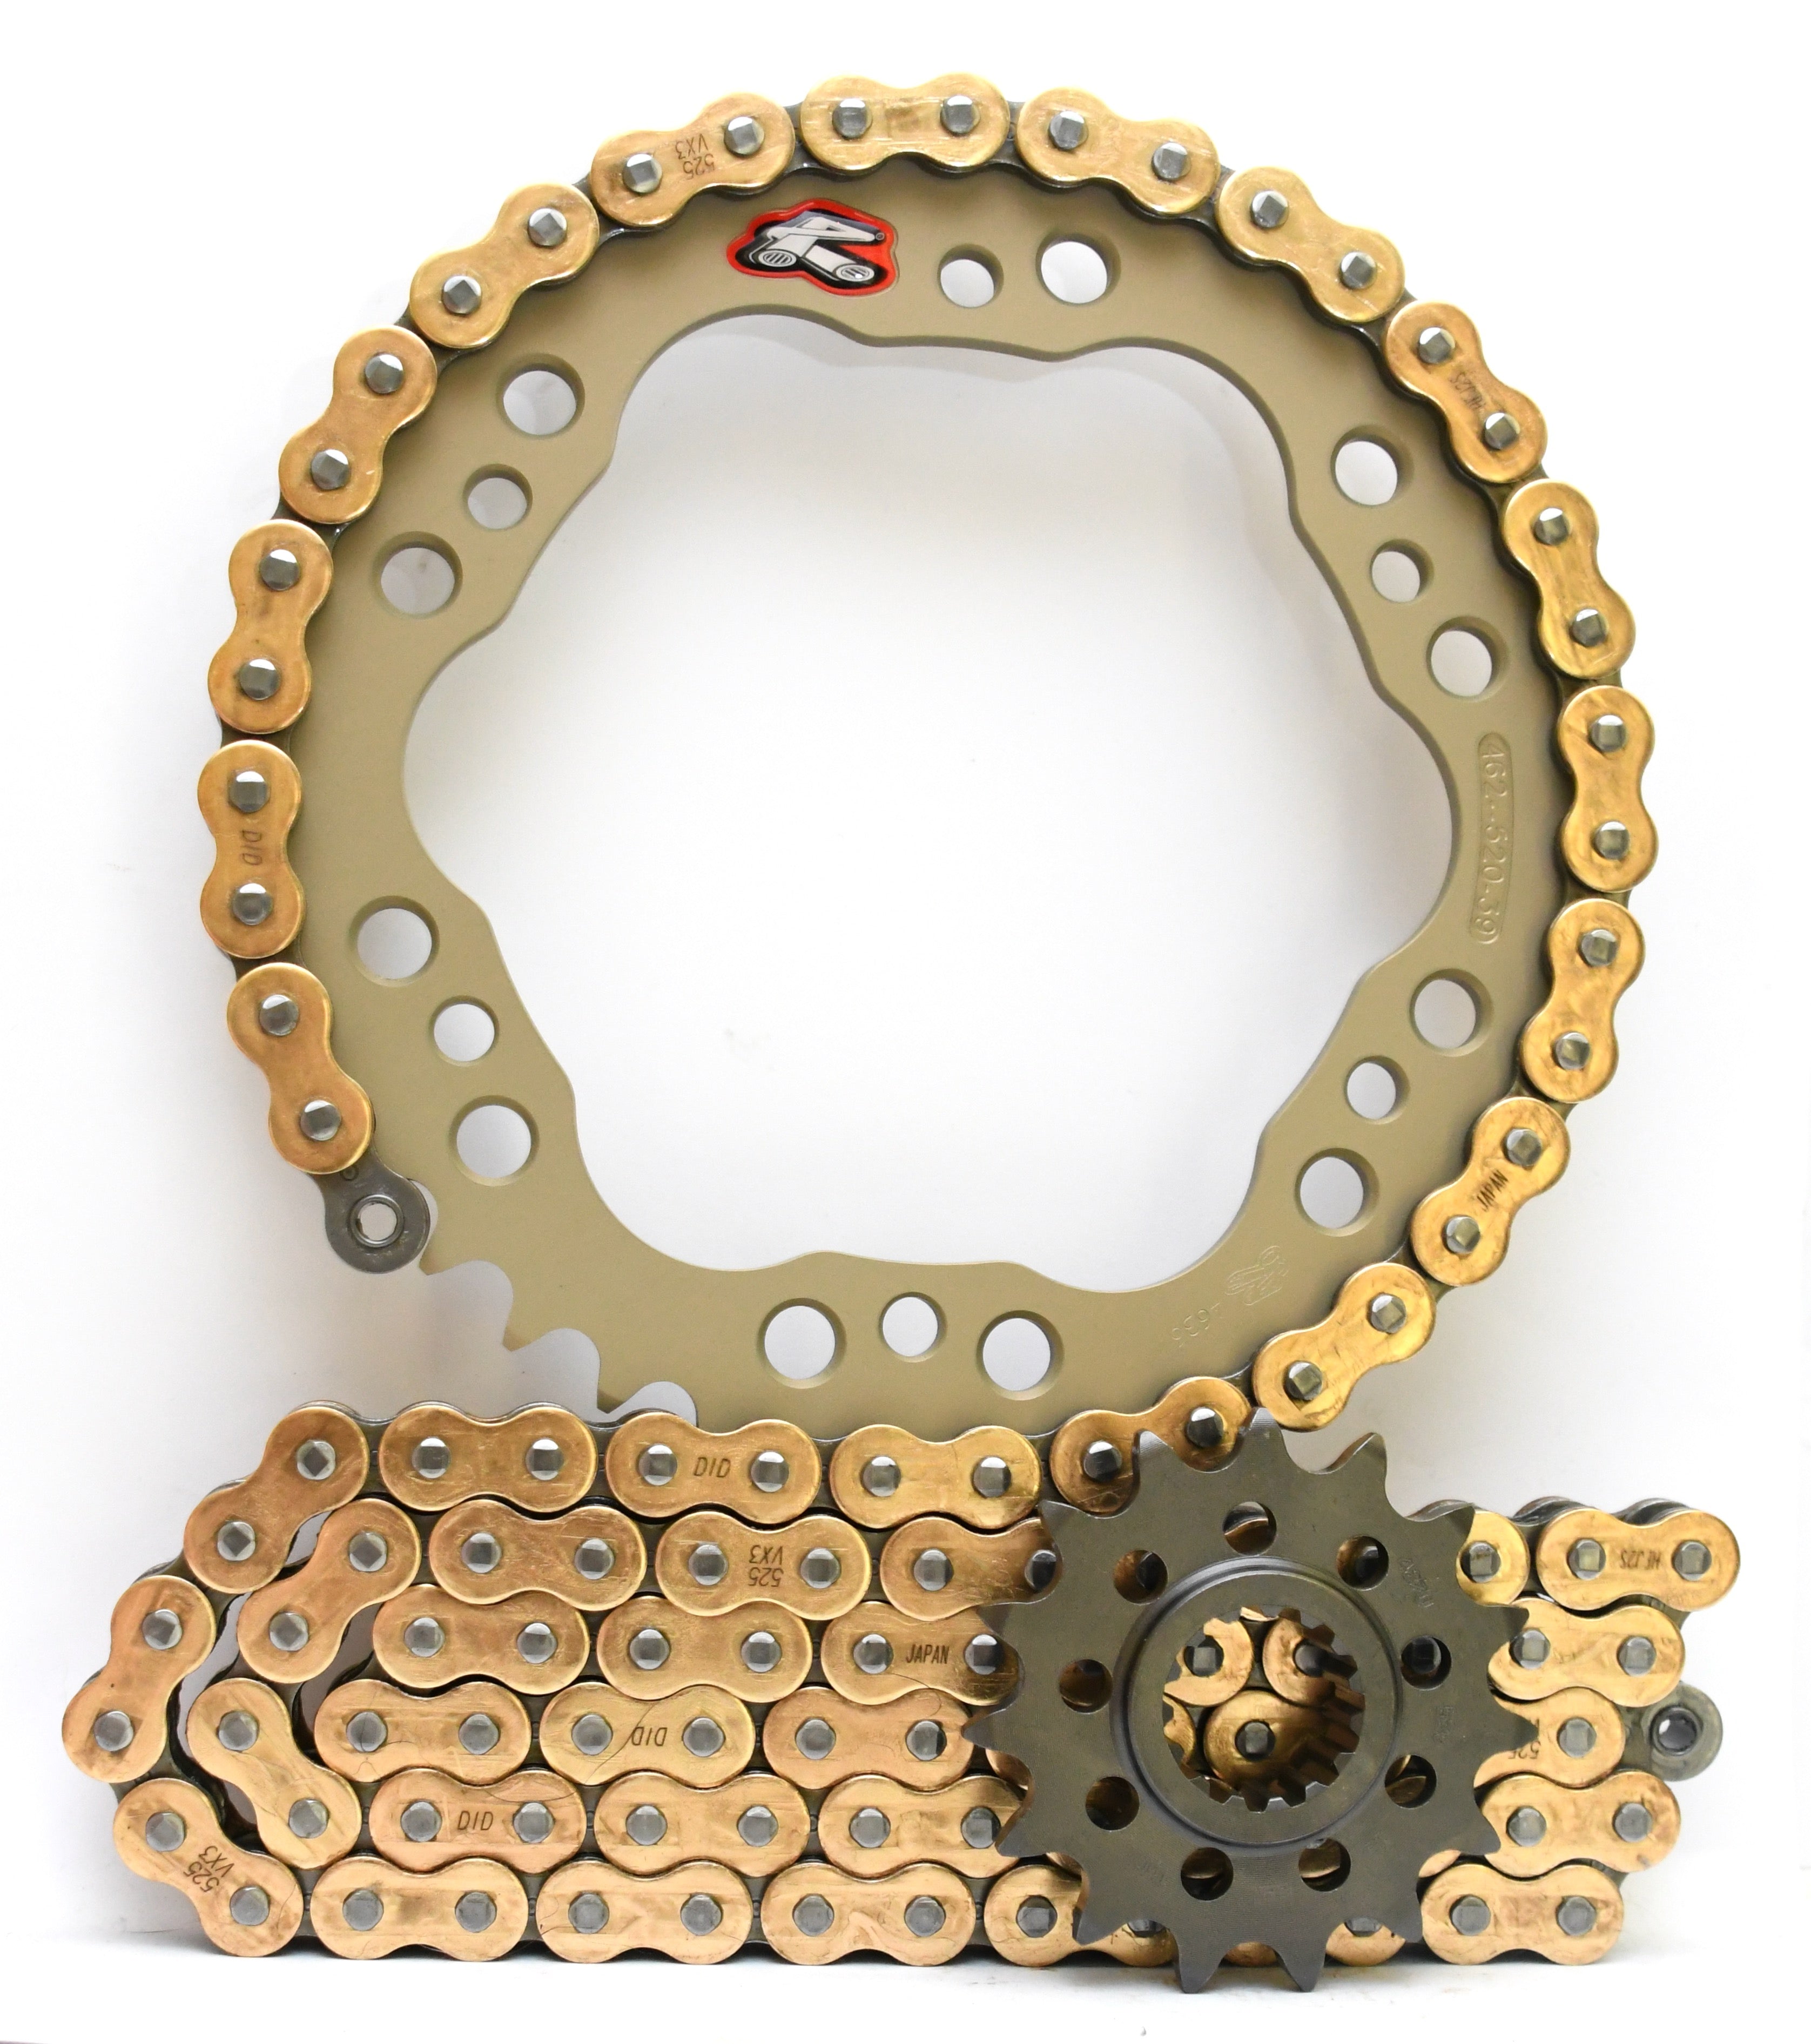 Renthal 520 Conversion Chain & Sprocket Kit for Ducati Panigale 1199 and 1299 - Standard Gearing